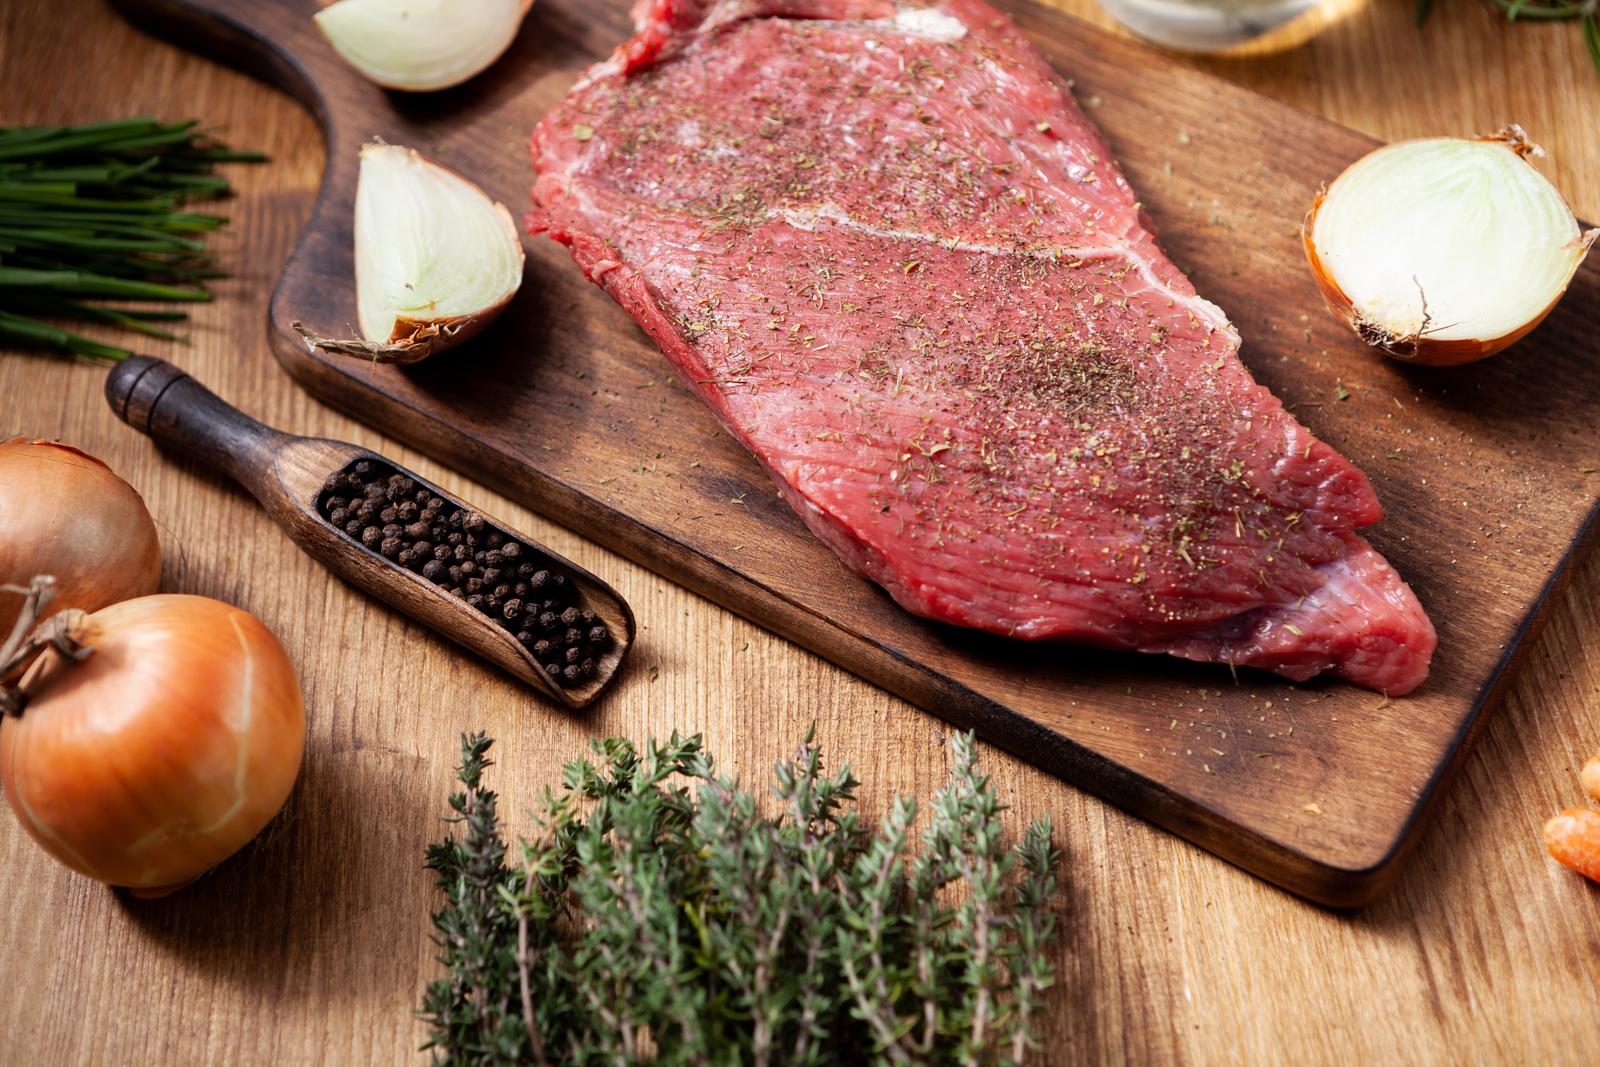 Wood Or Plastic Cutting Board For Meat - Which Is Best? - Butcher